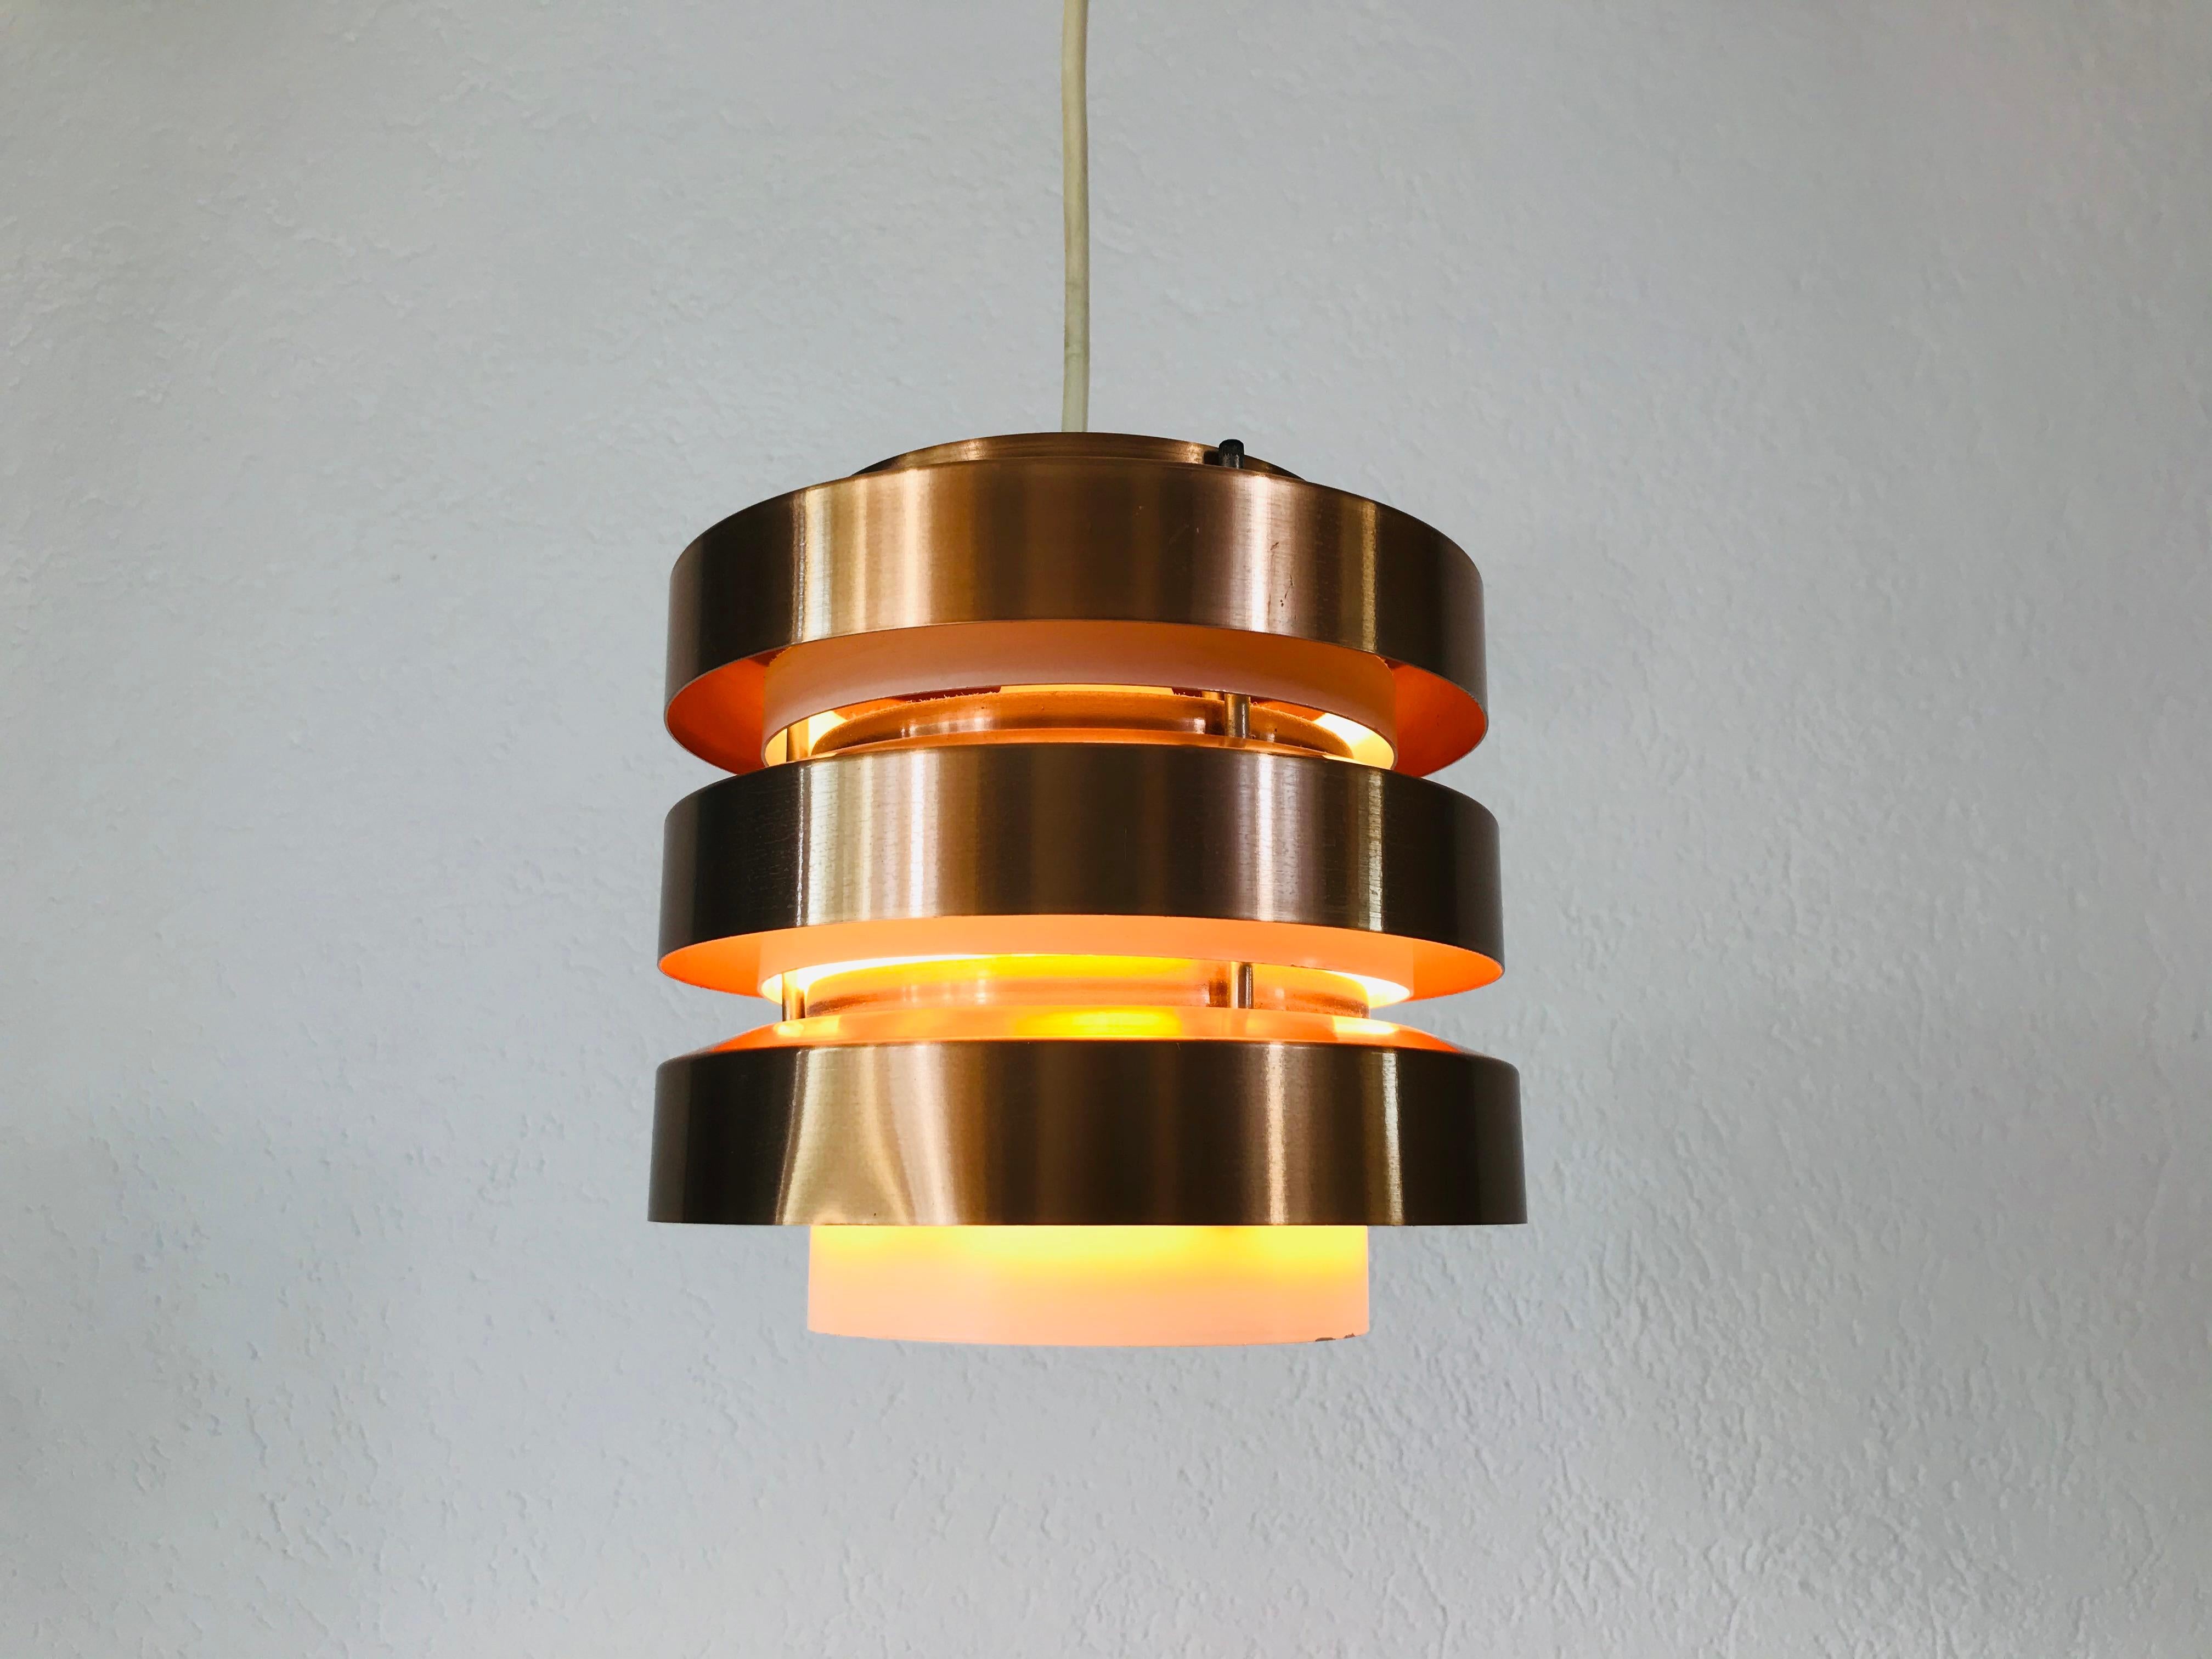 Rare Copper and Metal Pendant Lamp from DDR, 1960s For Sale 5